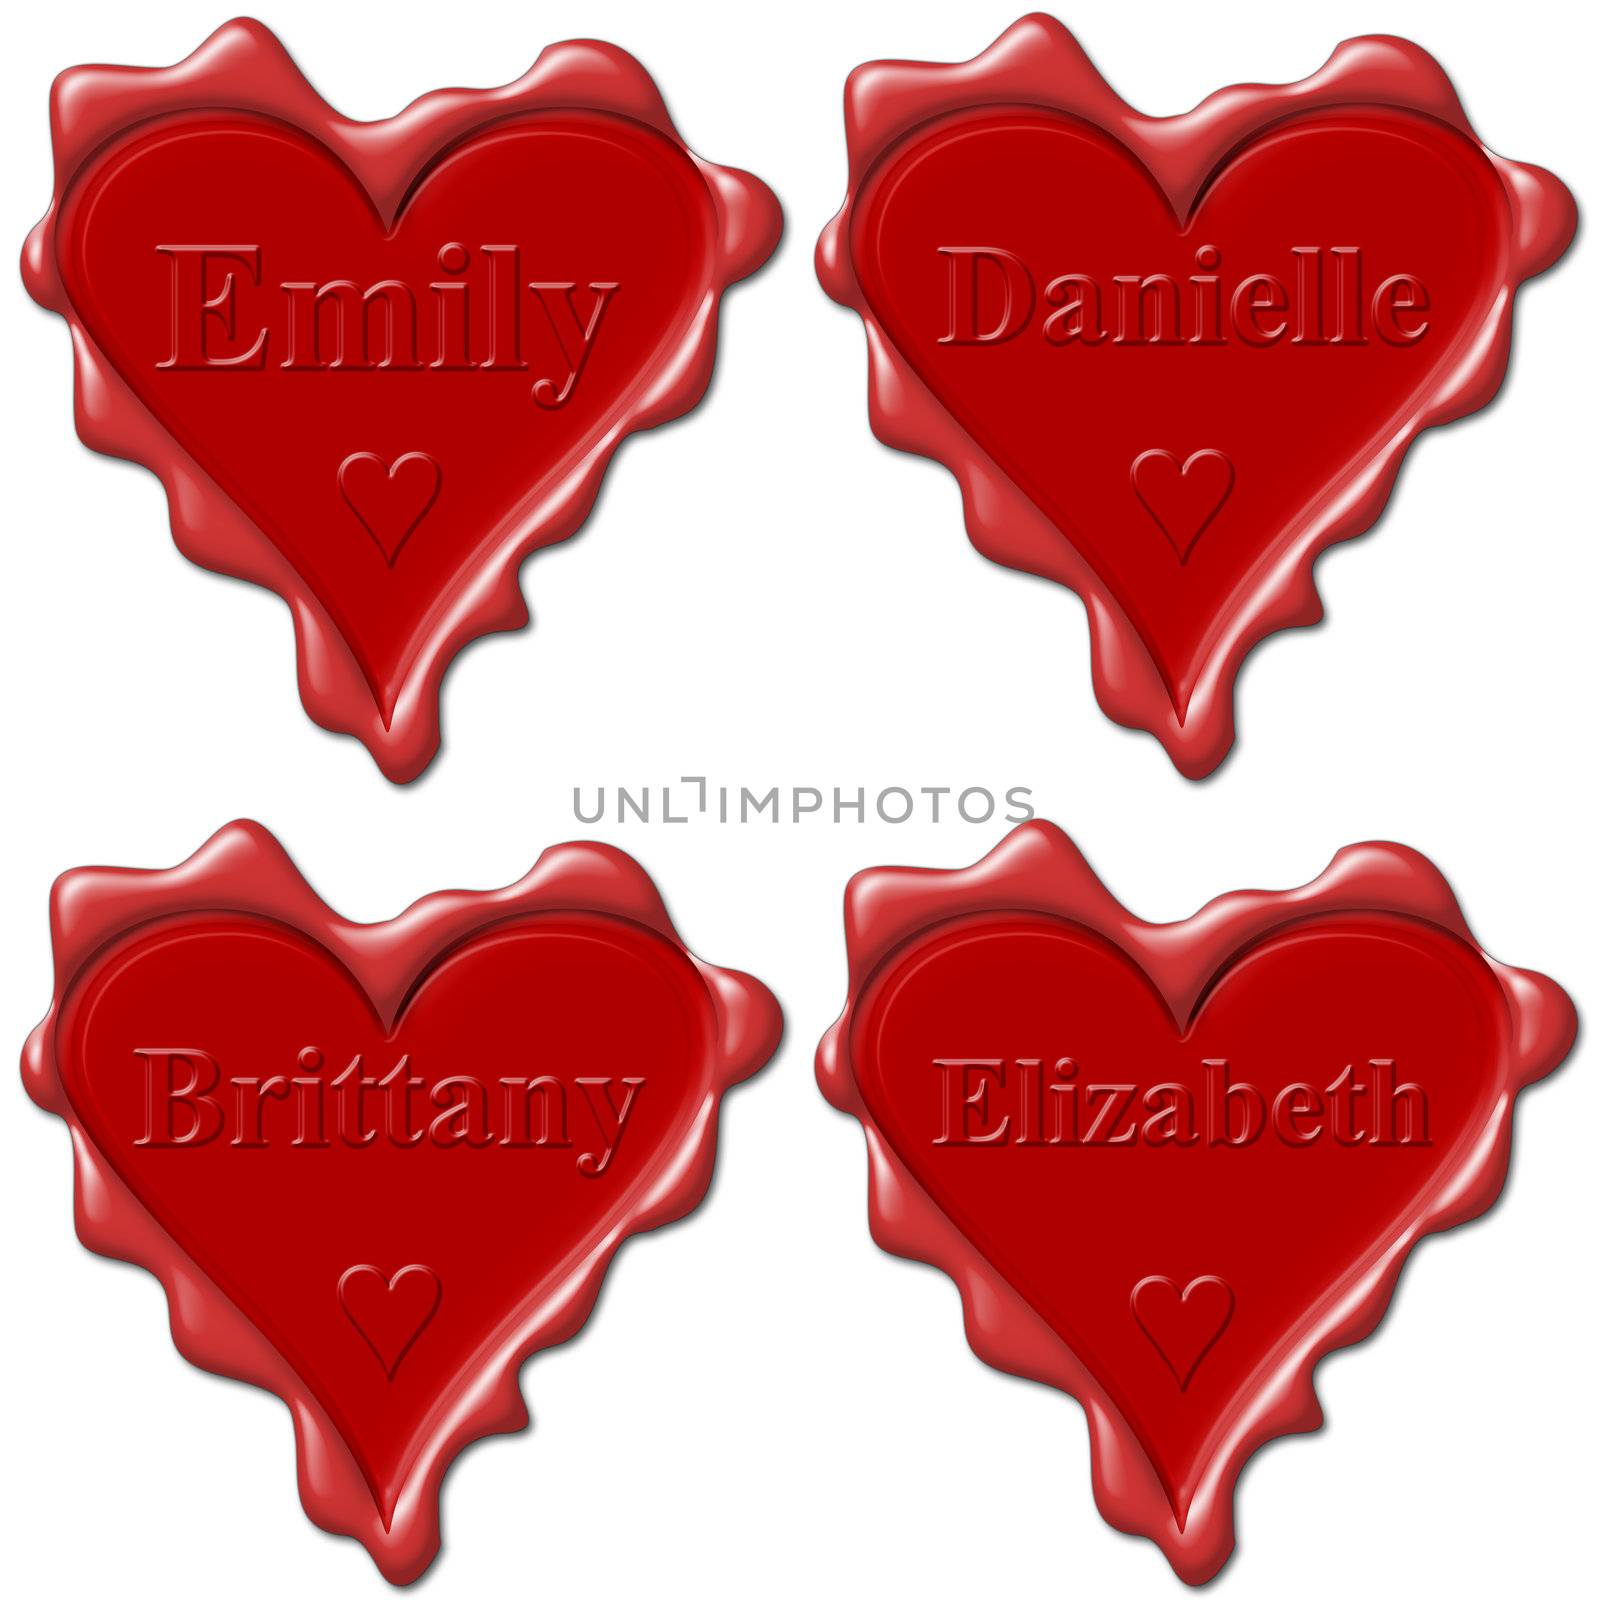 Valentine love hearts with names: Emily, Danielle, Brittany, Elizabeth